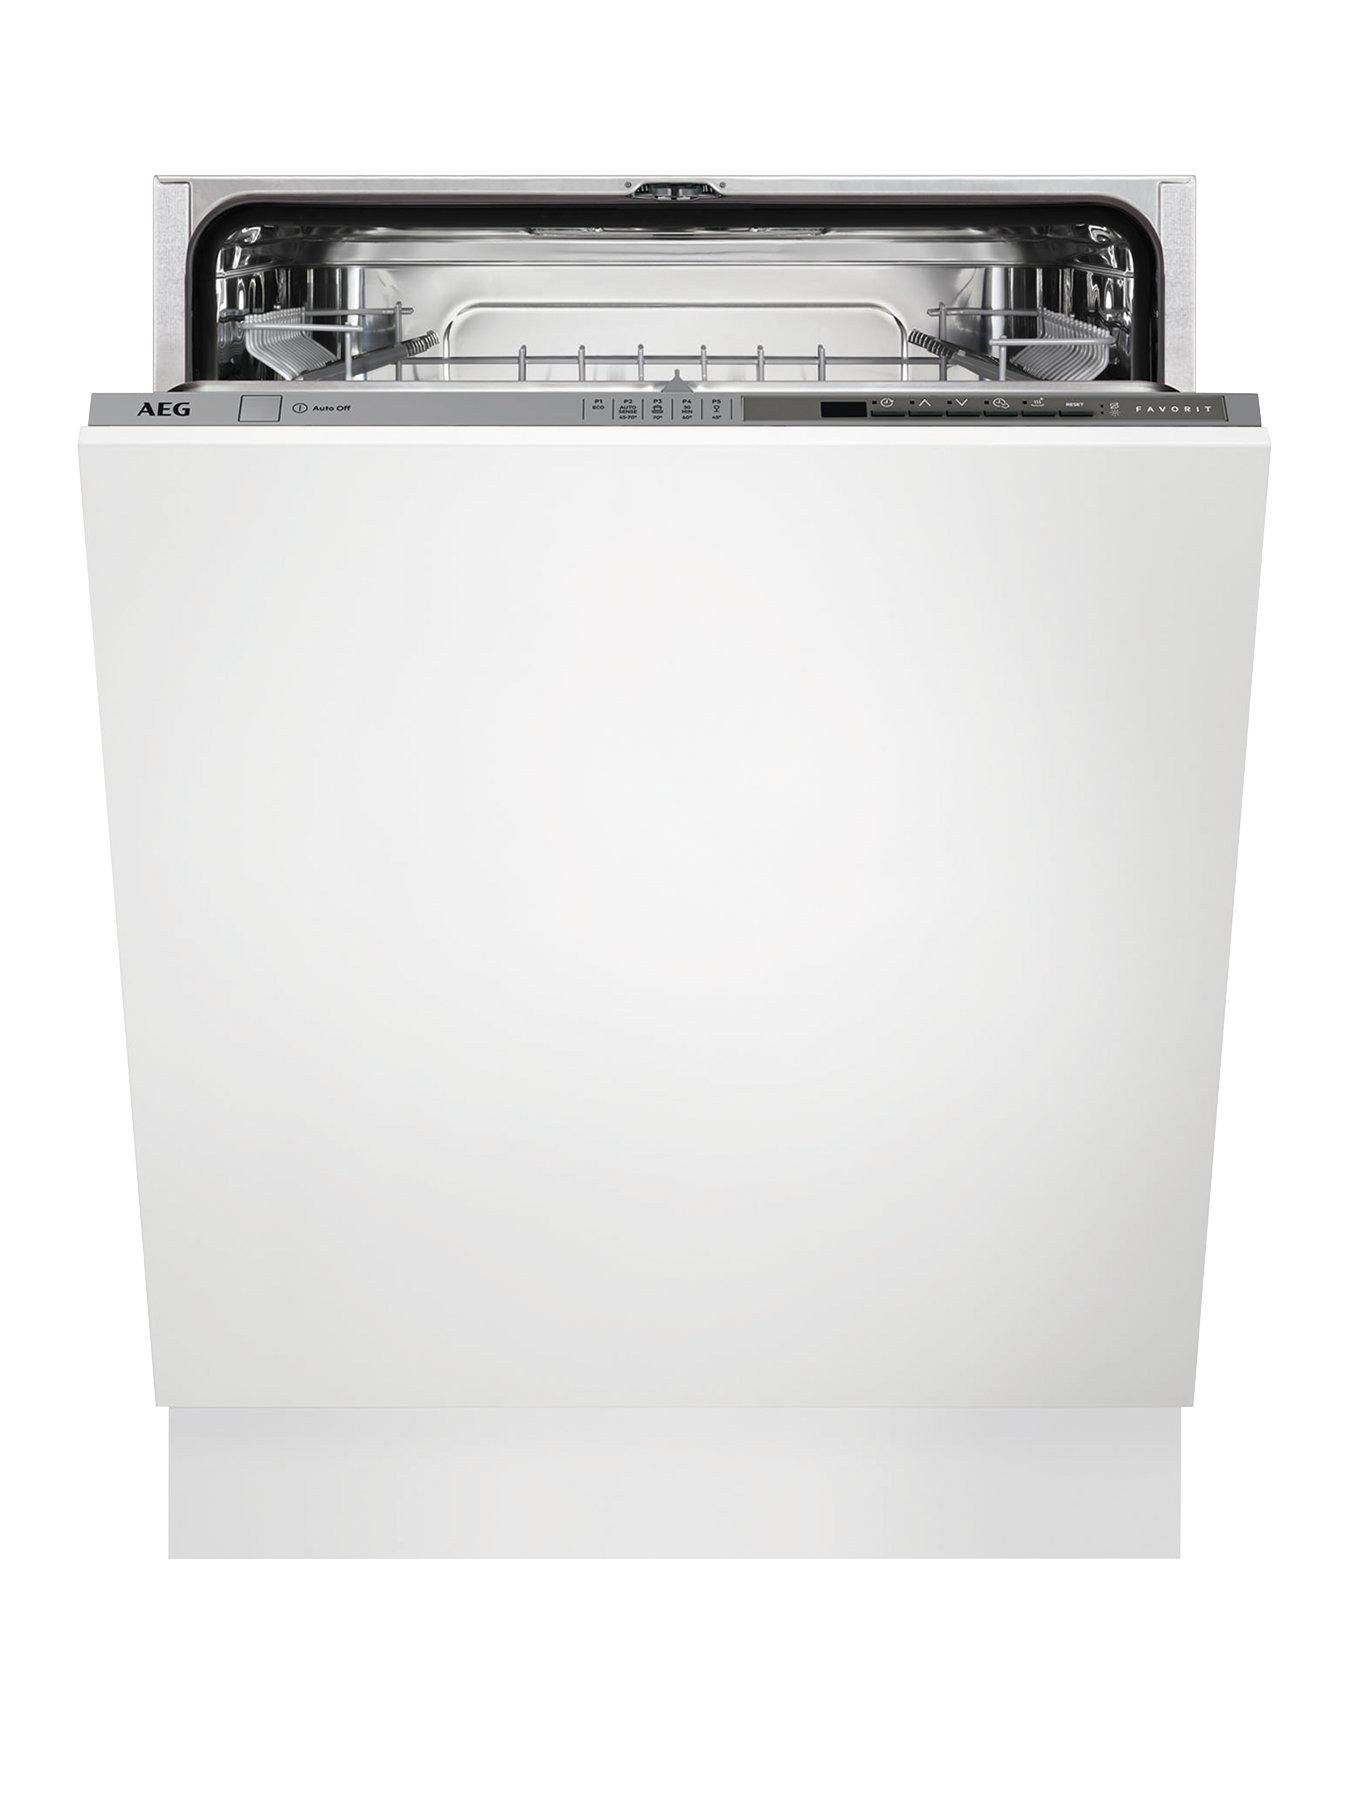 Aeg Fss52615Z Integrated 13-Place Dishwasher Review thumbnail